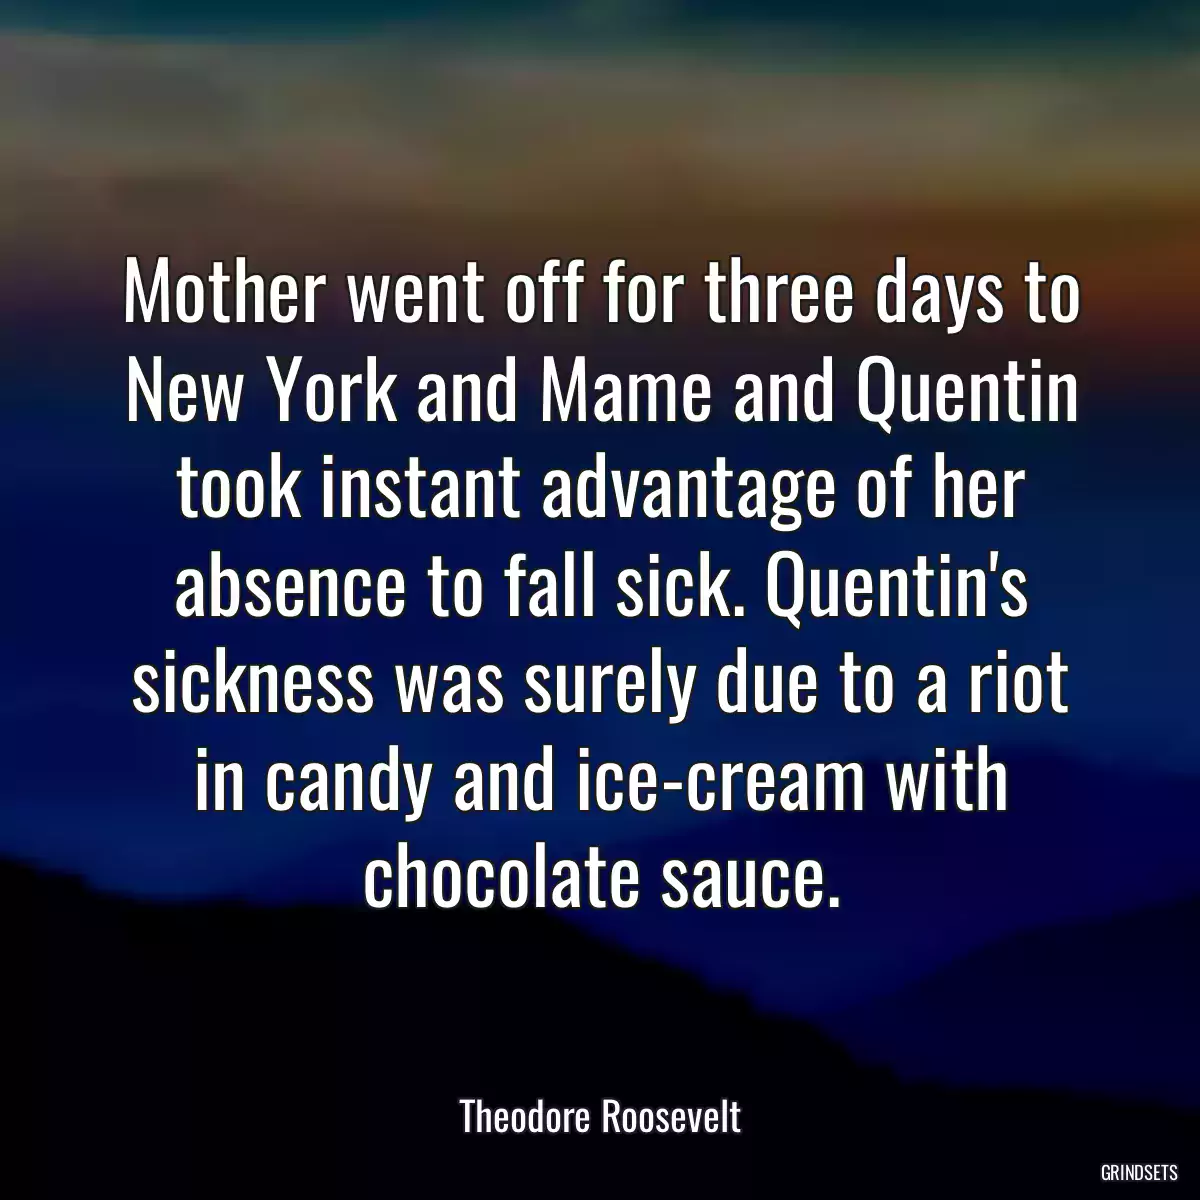 Mother went off for three days to New York and Mame and Quentin took instant advantage of her absence to fall sick. Quentin\'s sickness was surely due to a riot in candy and ice-cream with chocolate sauce.